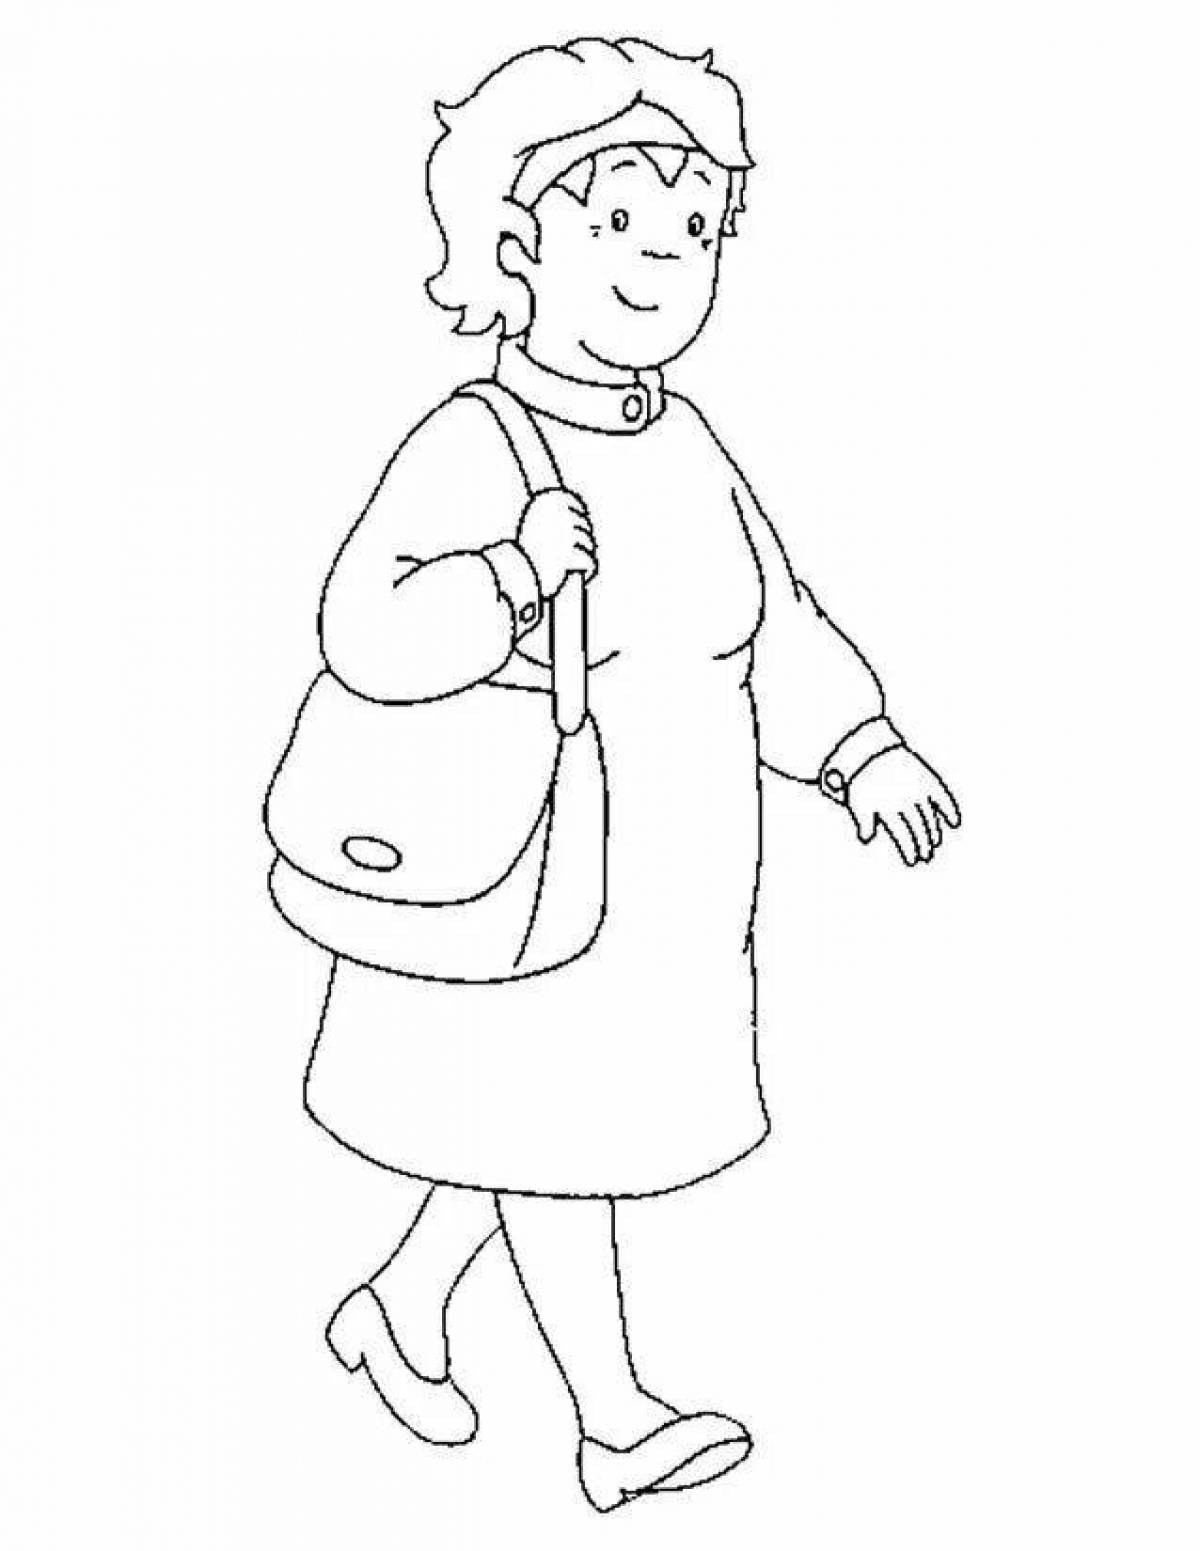 Grandmother's animated coloring page